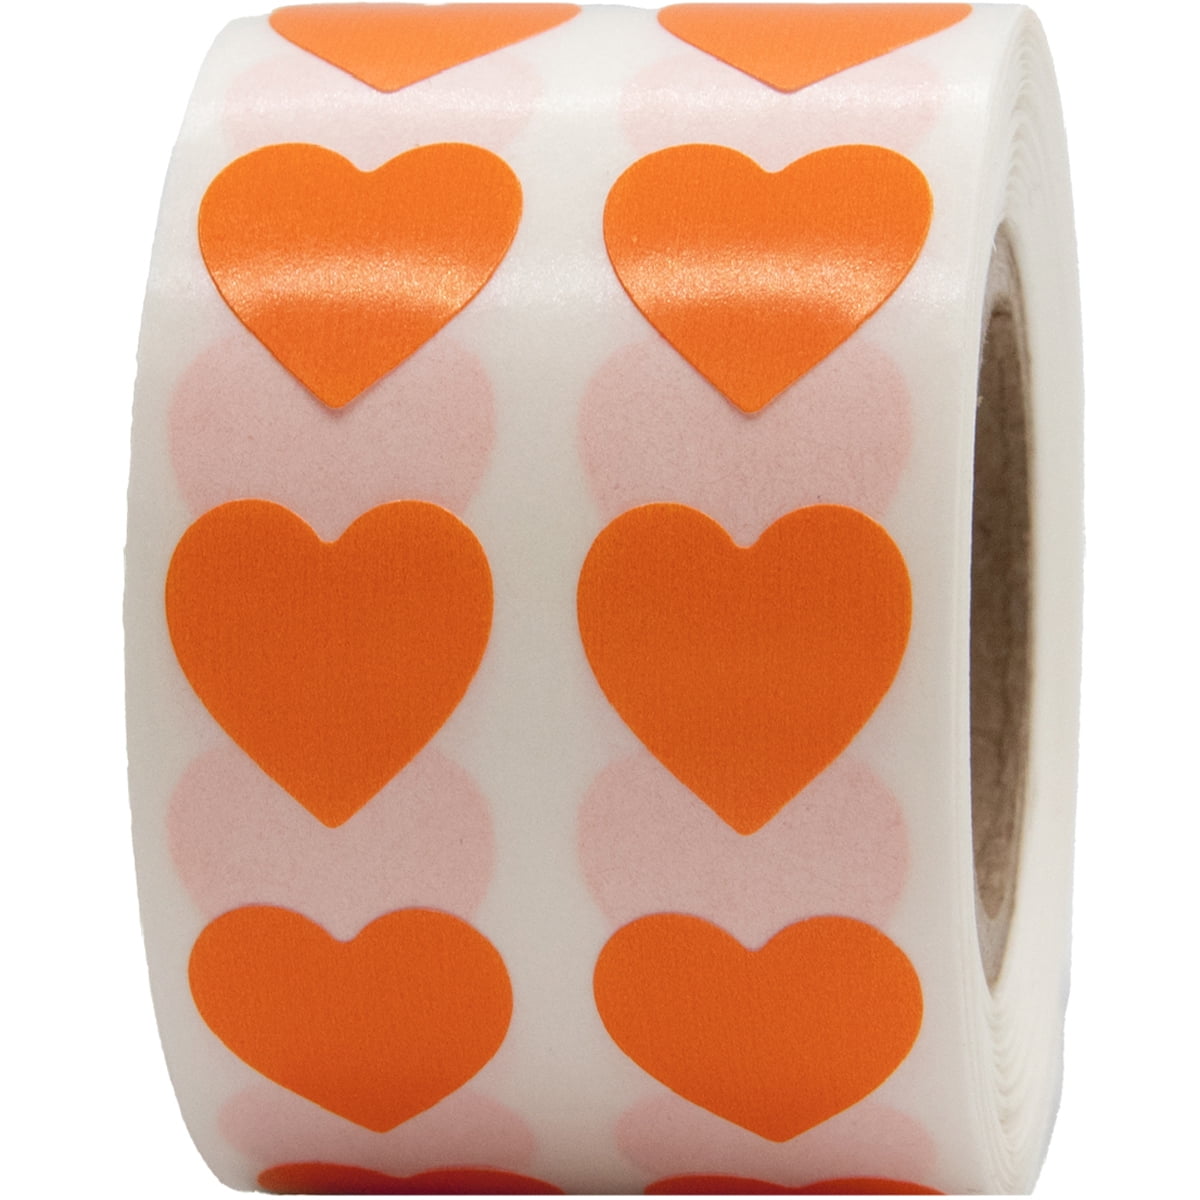 Orange Heart Stickers, 0.5 Inch Wide, 1000 Labels on a Roll 